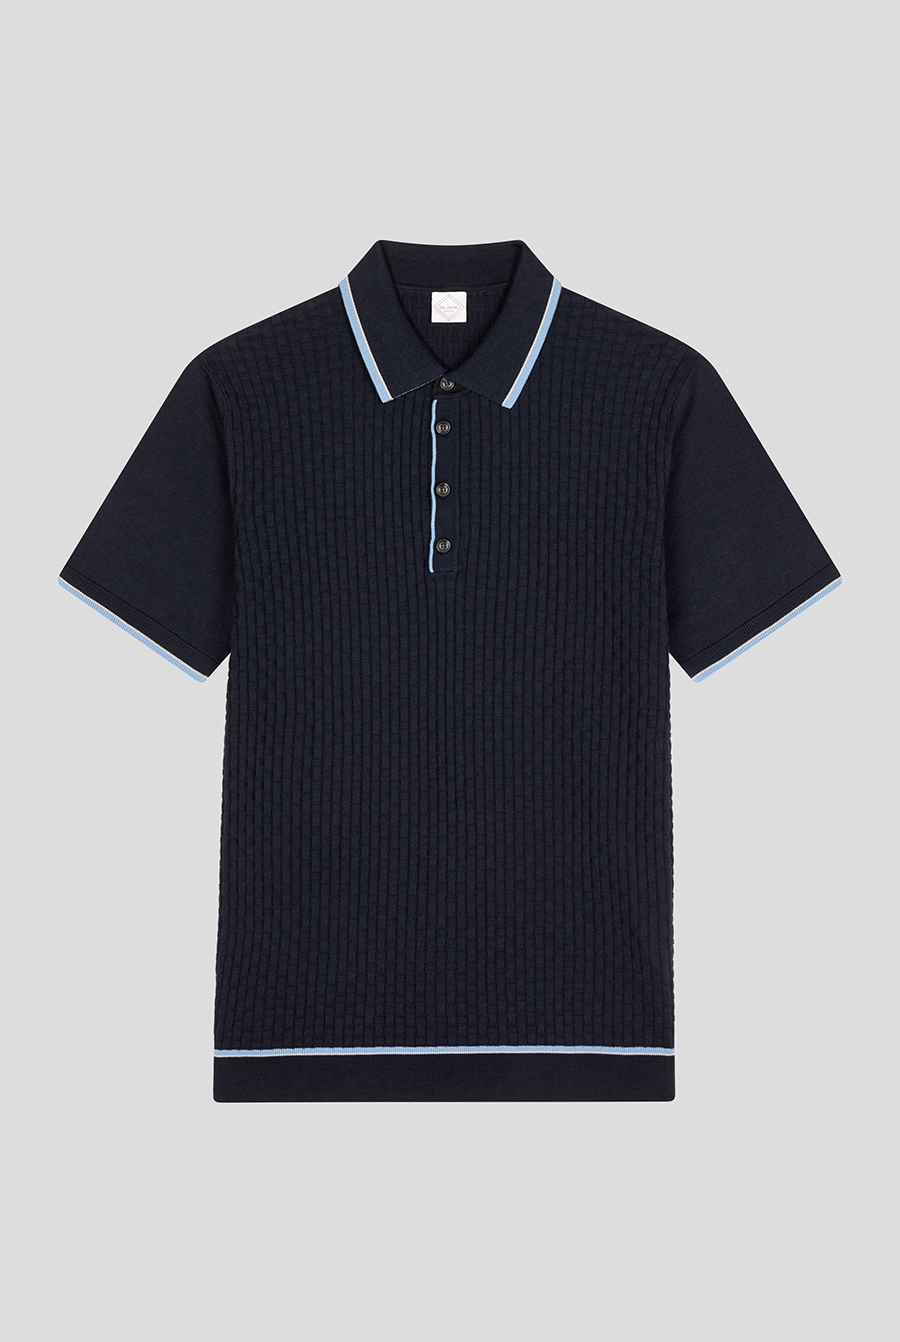 Polo shirt in pure cotton knit with all-over stitch BLUE NAVY Pal ...